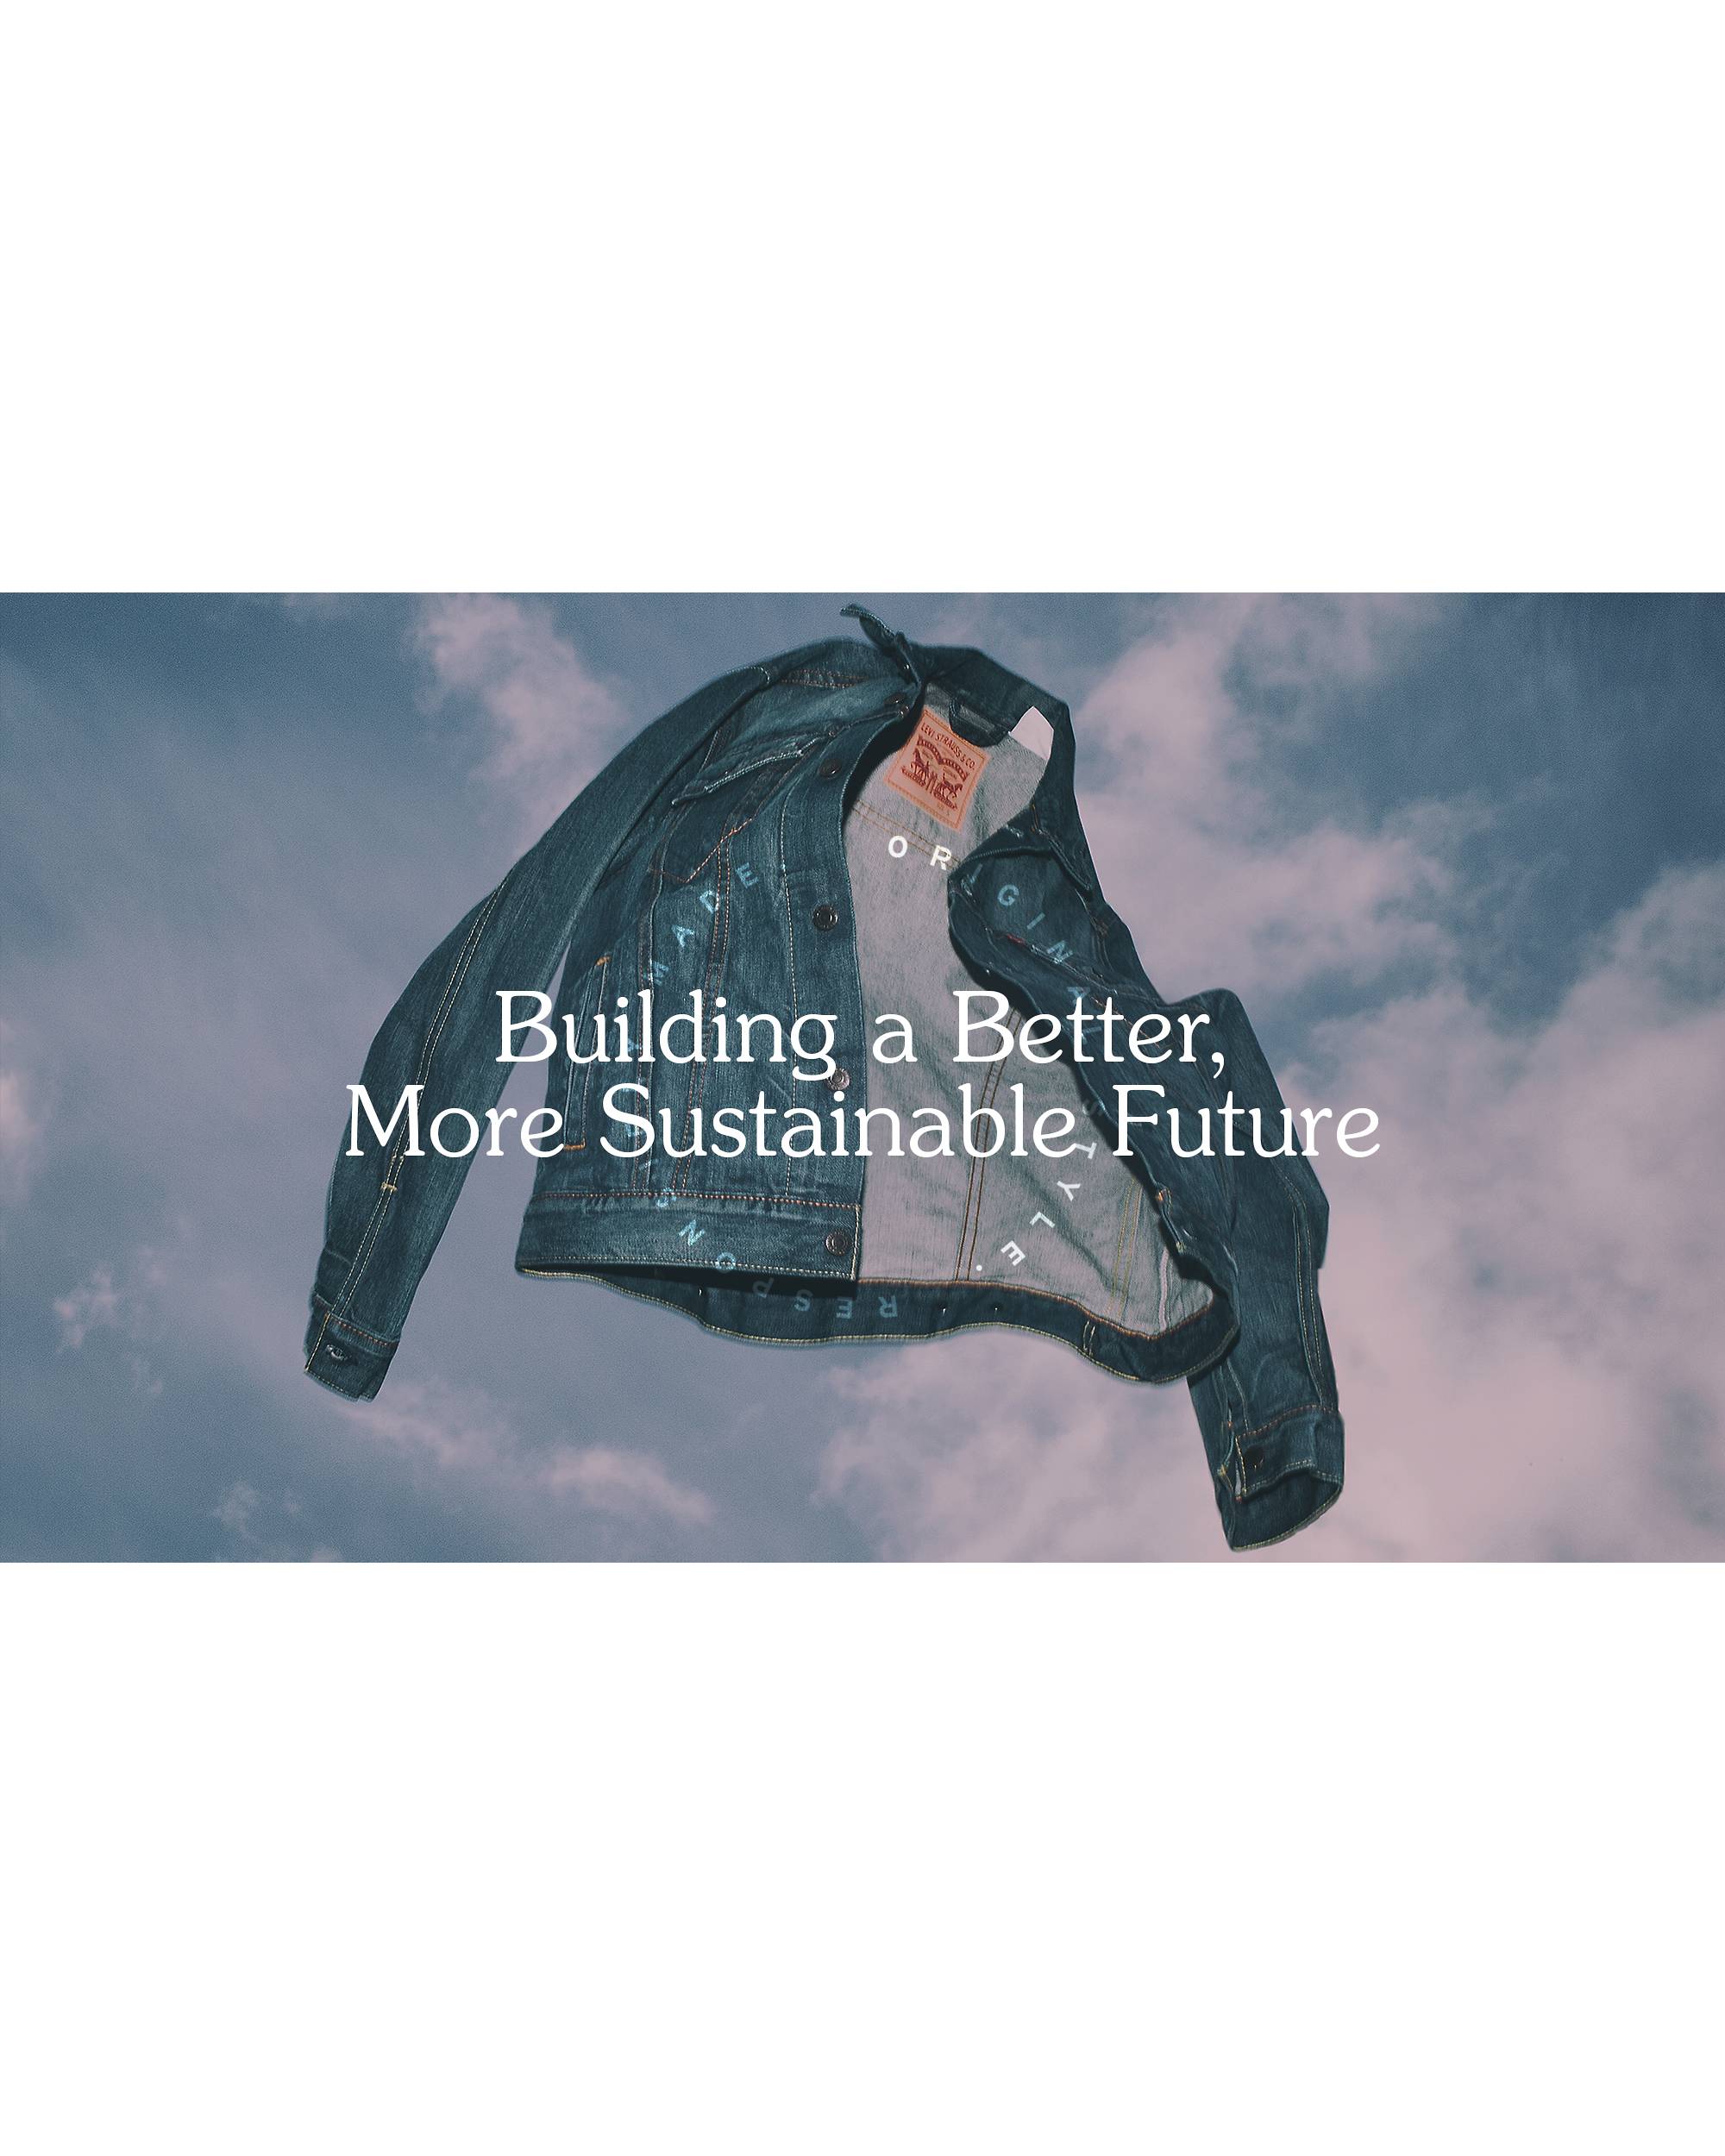 Building a Better, More Sustainable